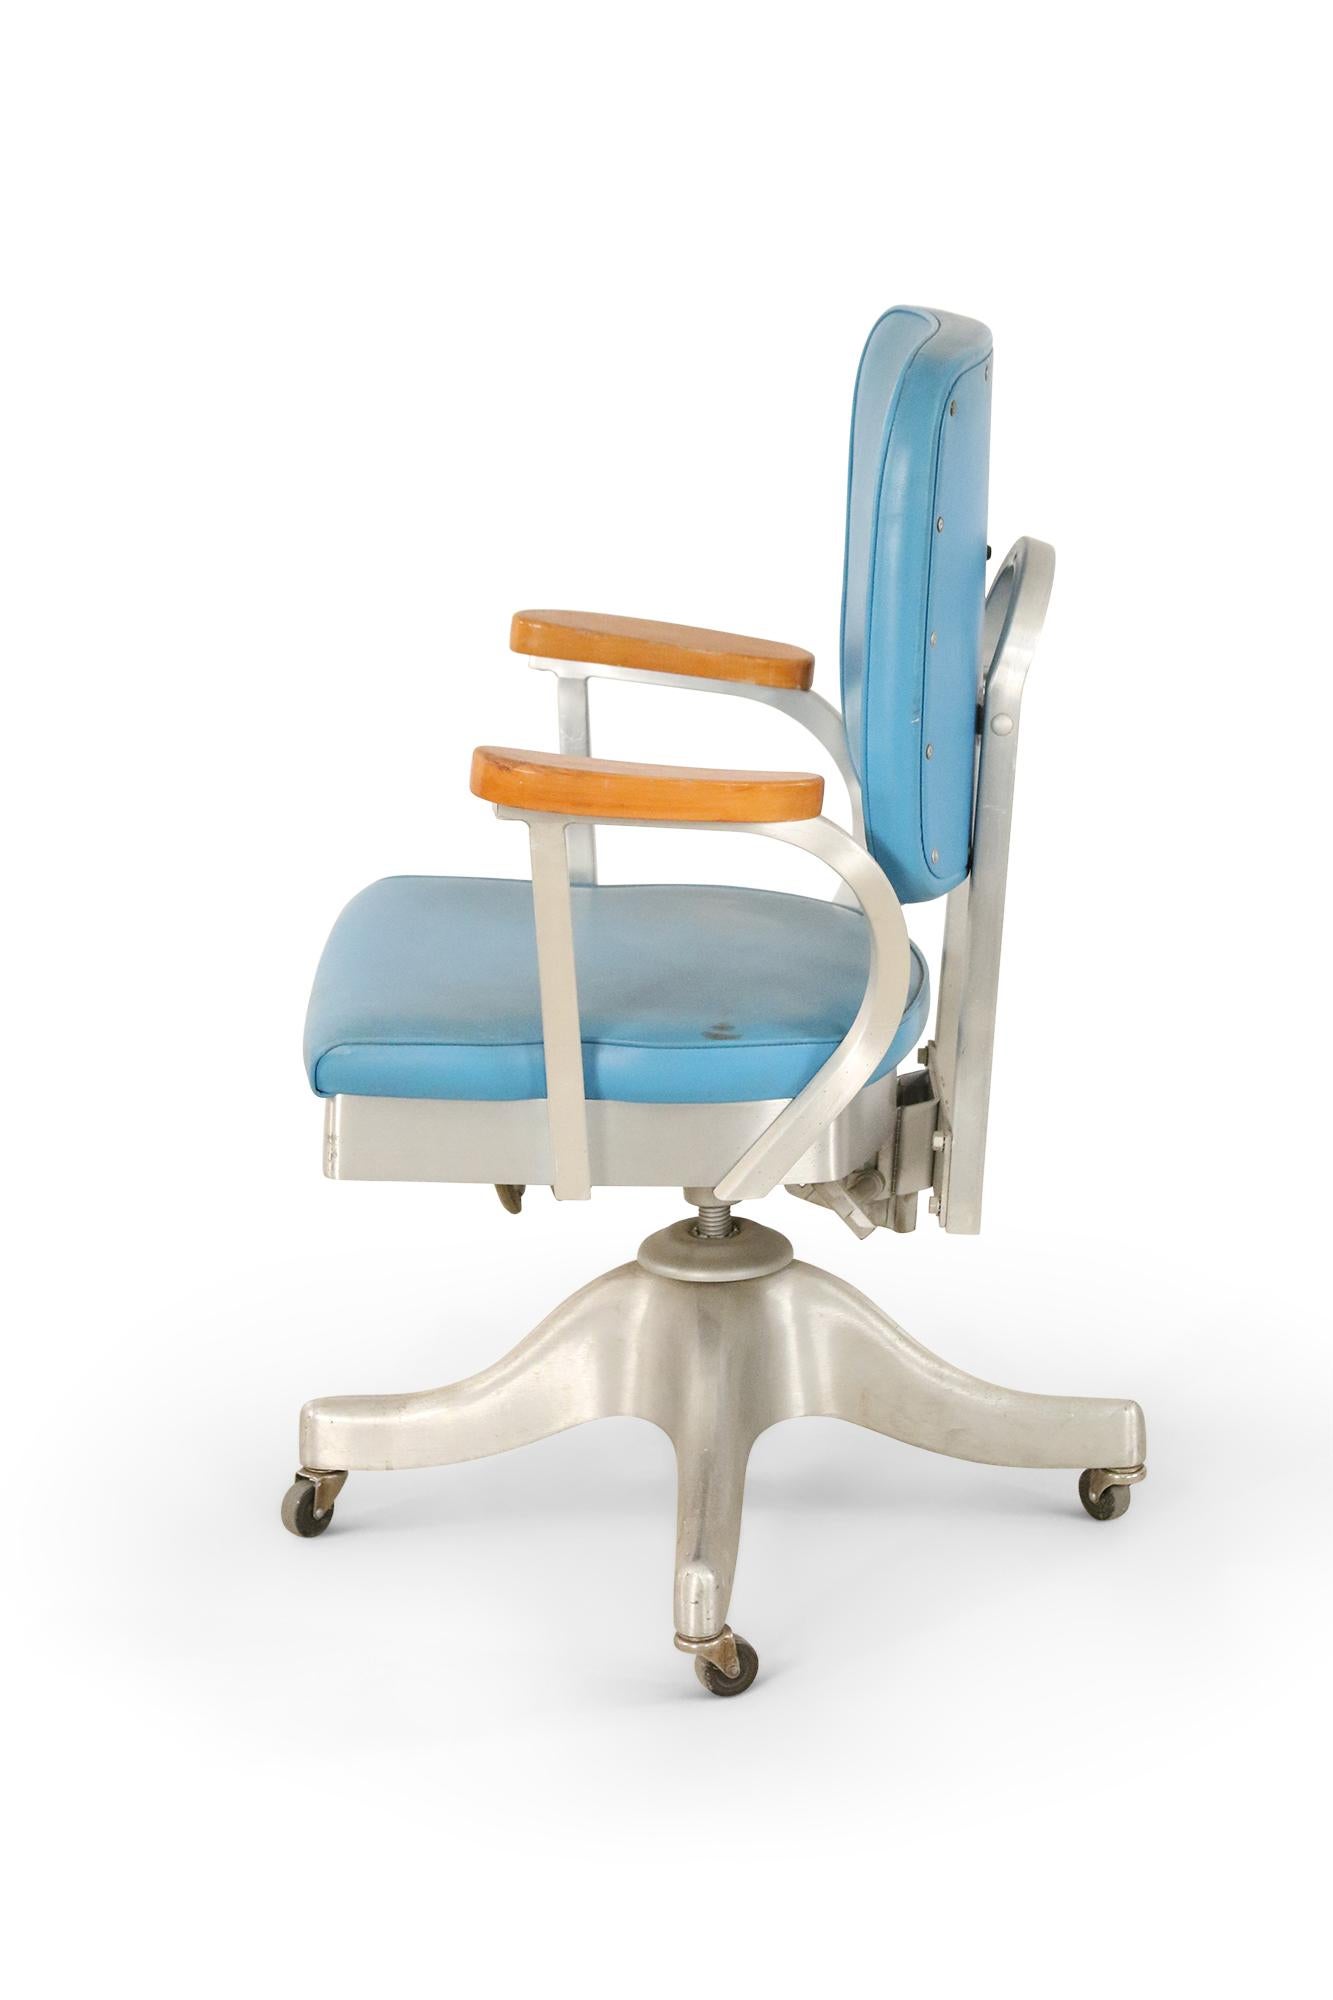 American mid-century rolling adjustable office chair with blue vinyl upholstery, silver metal frame with four wheels, and wooden armrests. (Shaw Walker Co.).
   